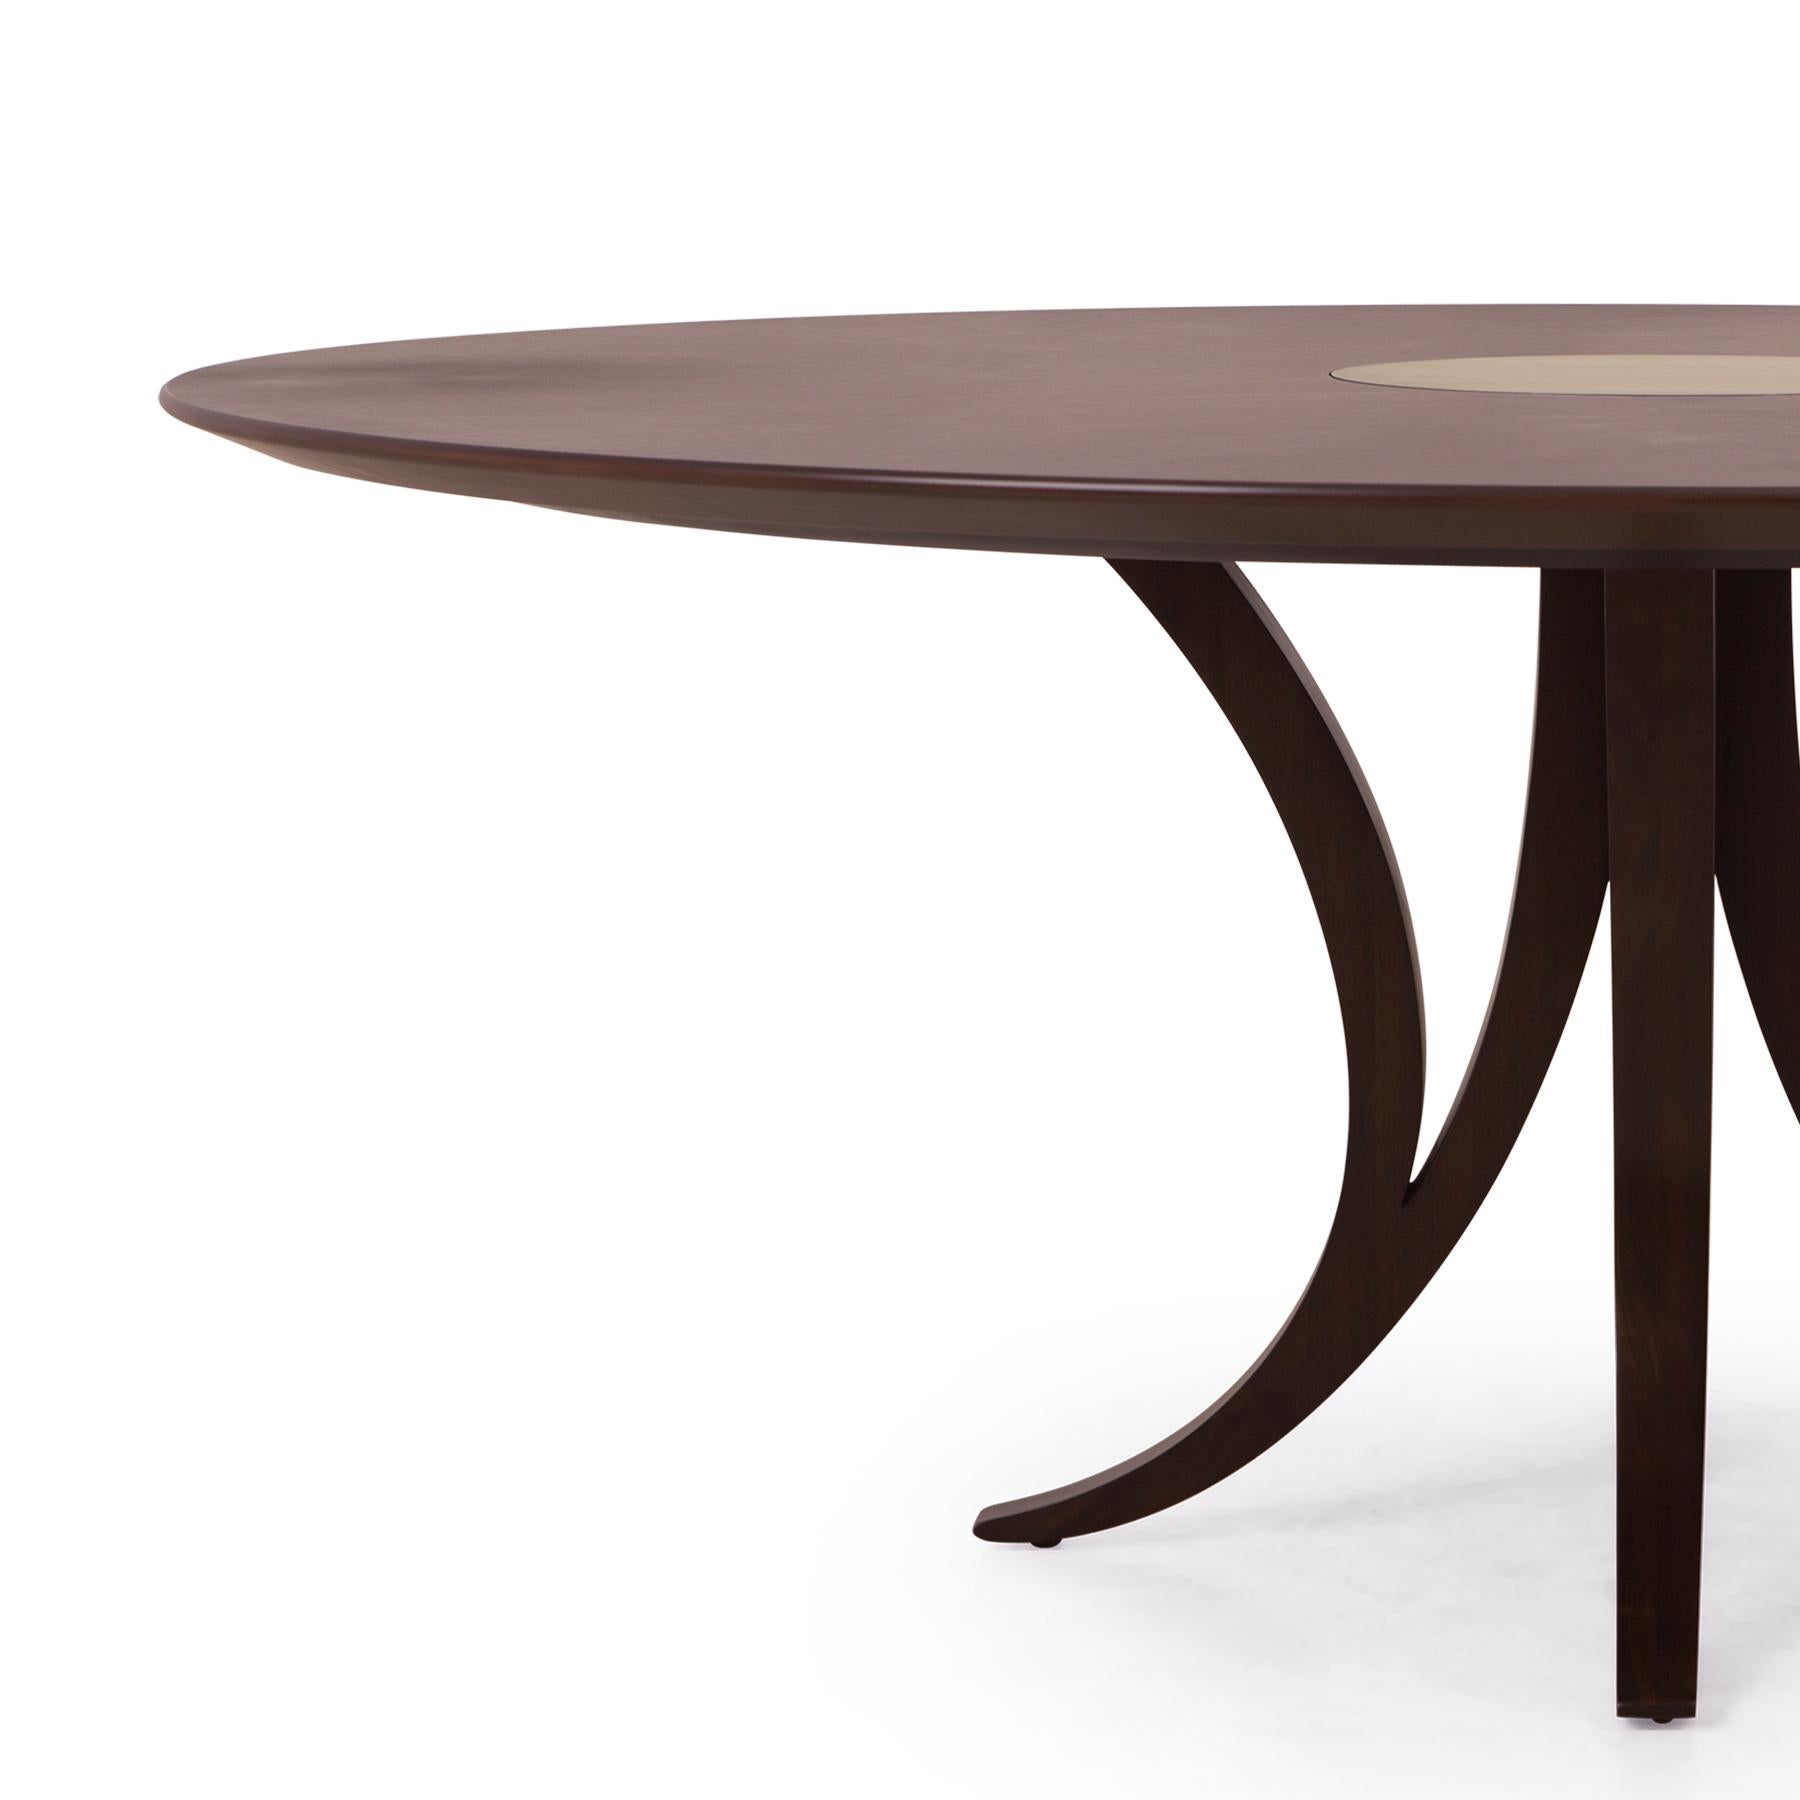 Table logical round in solid mahogany wood in tobacco
finish. With solid mahogany carved feet and with
veneered mahogany top with center top insert in
solid brass in vintage finish.
Available in:
Diameter 122 x H 75cm, price: 14500,00€
Diameter 152